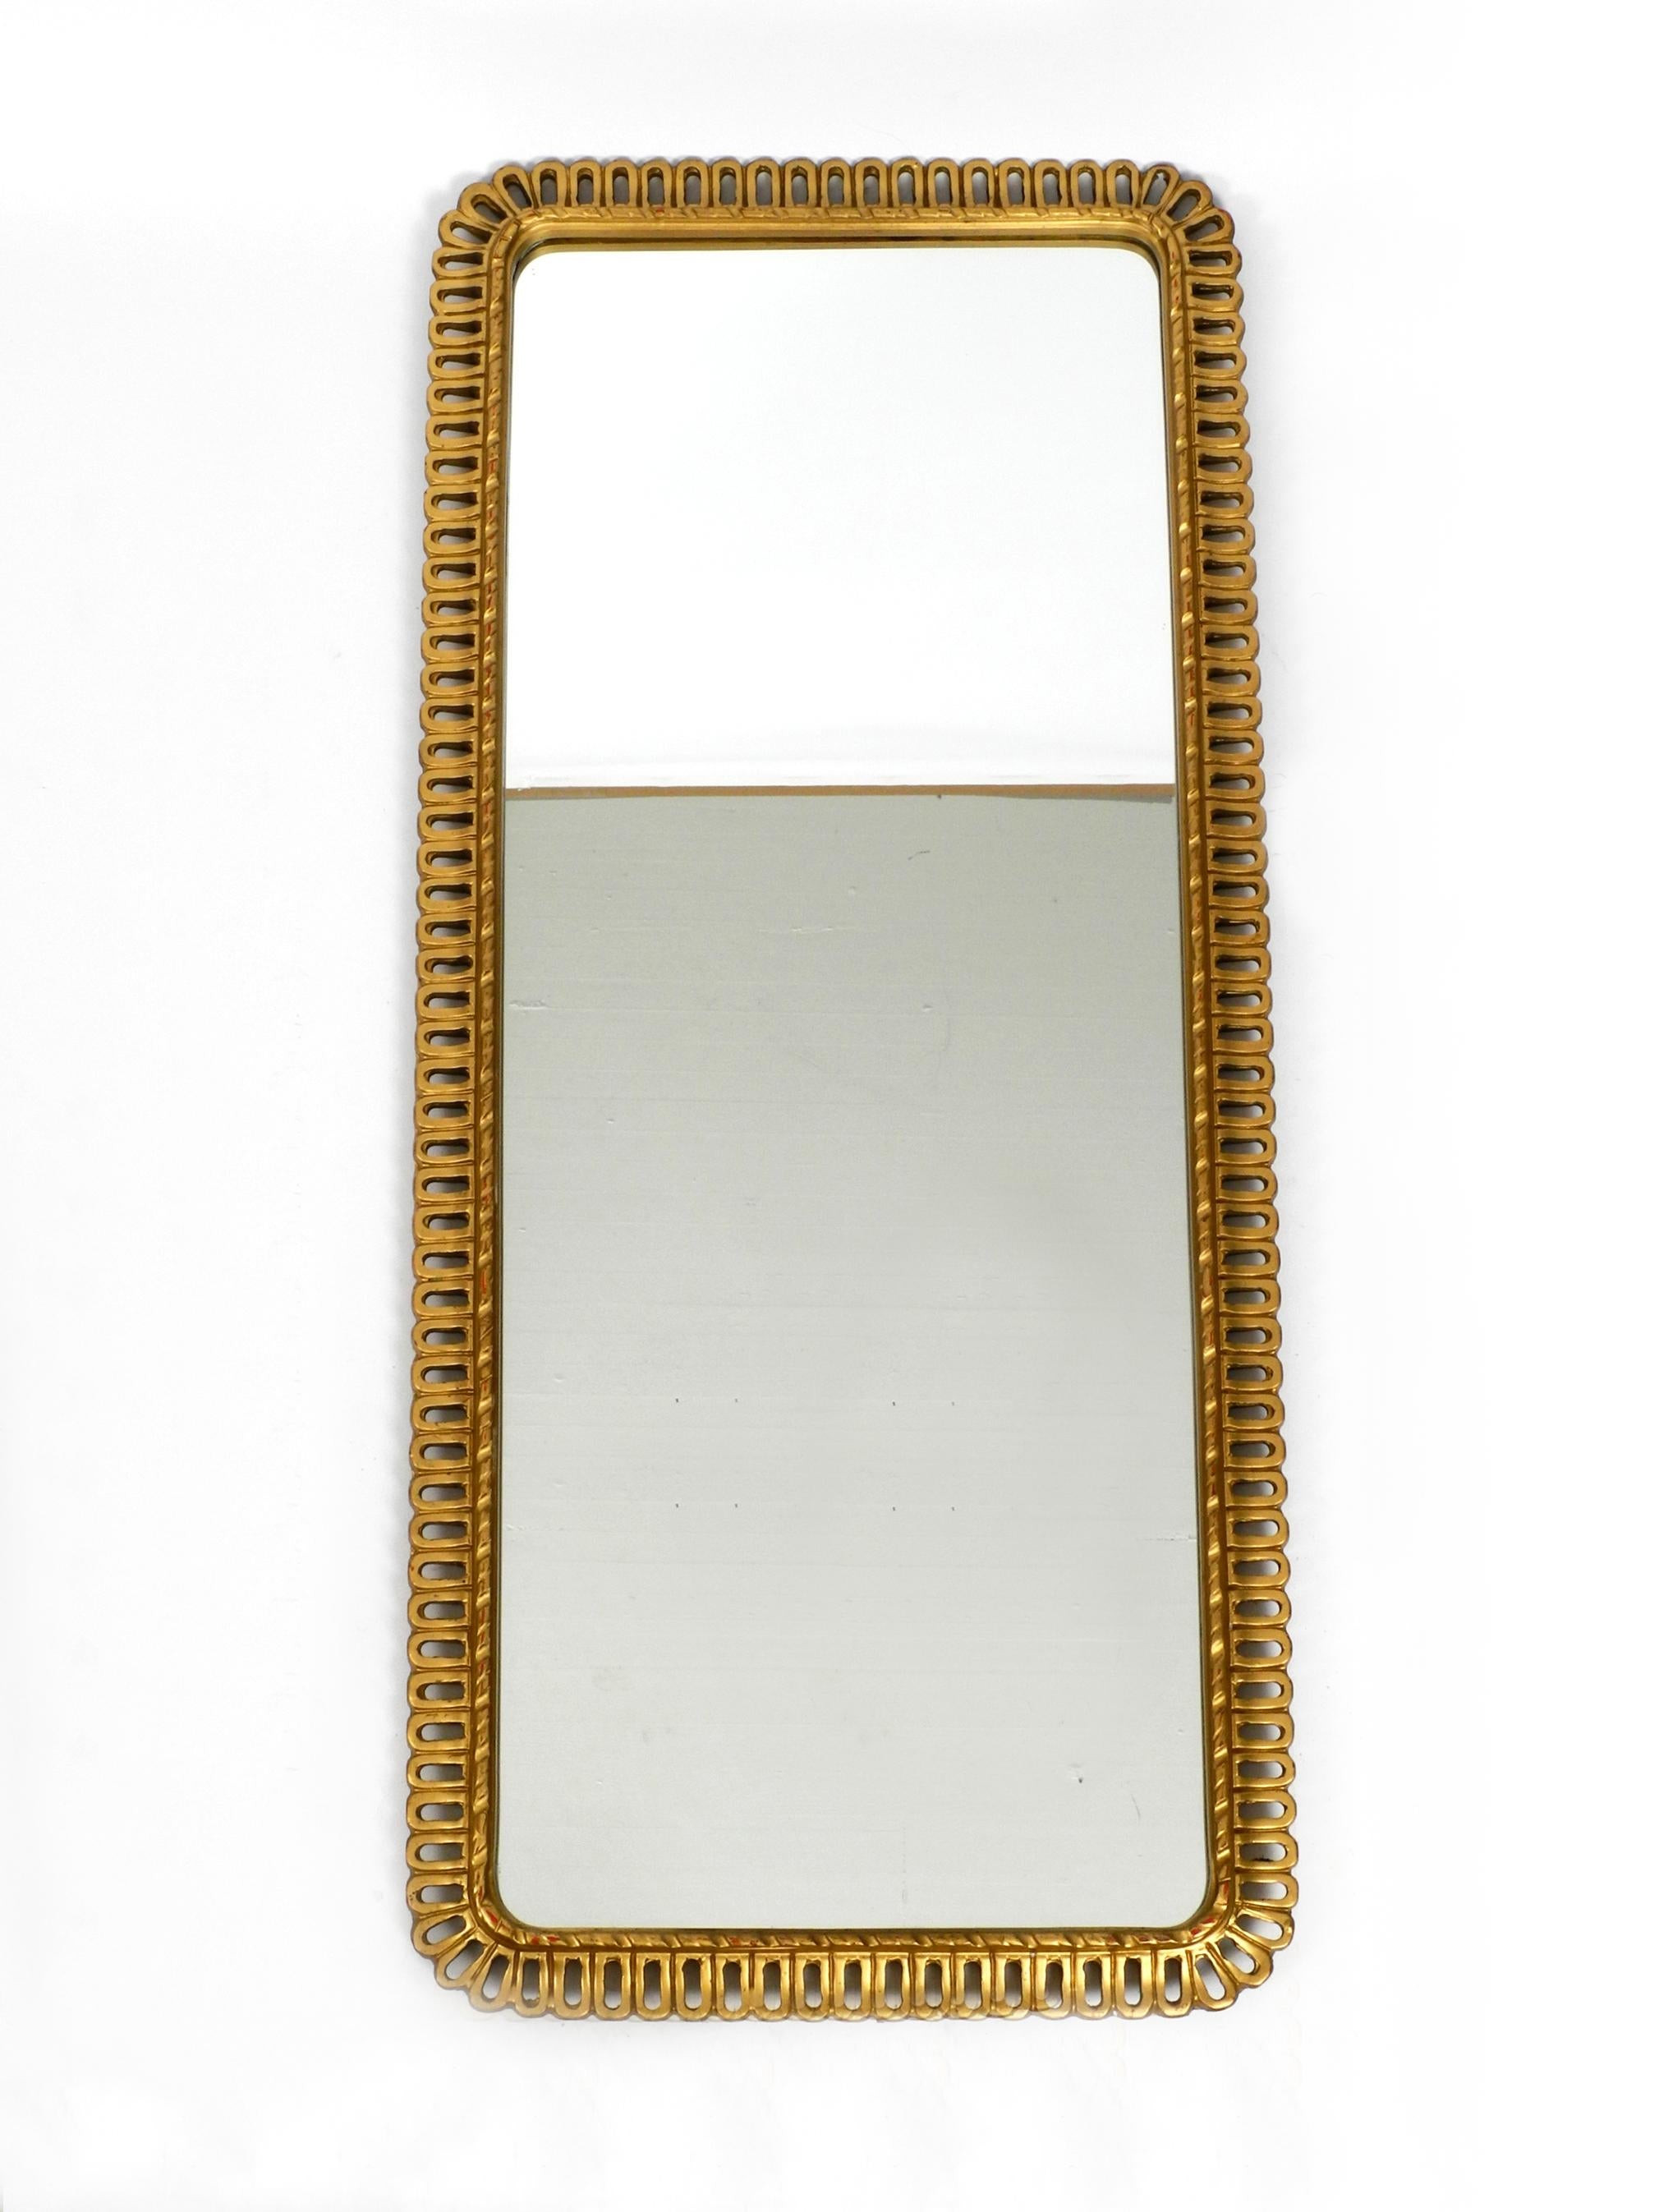 Rare beautiful long large wall mirror with high quality wooden frame.
The whole frame is gilded. Very high quality manufactured 
by Schöninger Spiegel, Germany. Great 1950s design.
Very good vintage condition without damage with fantastic